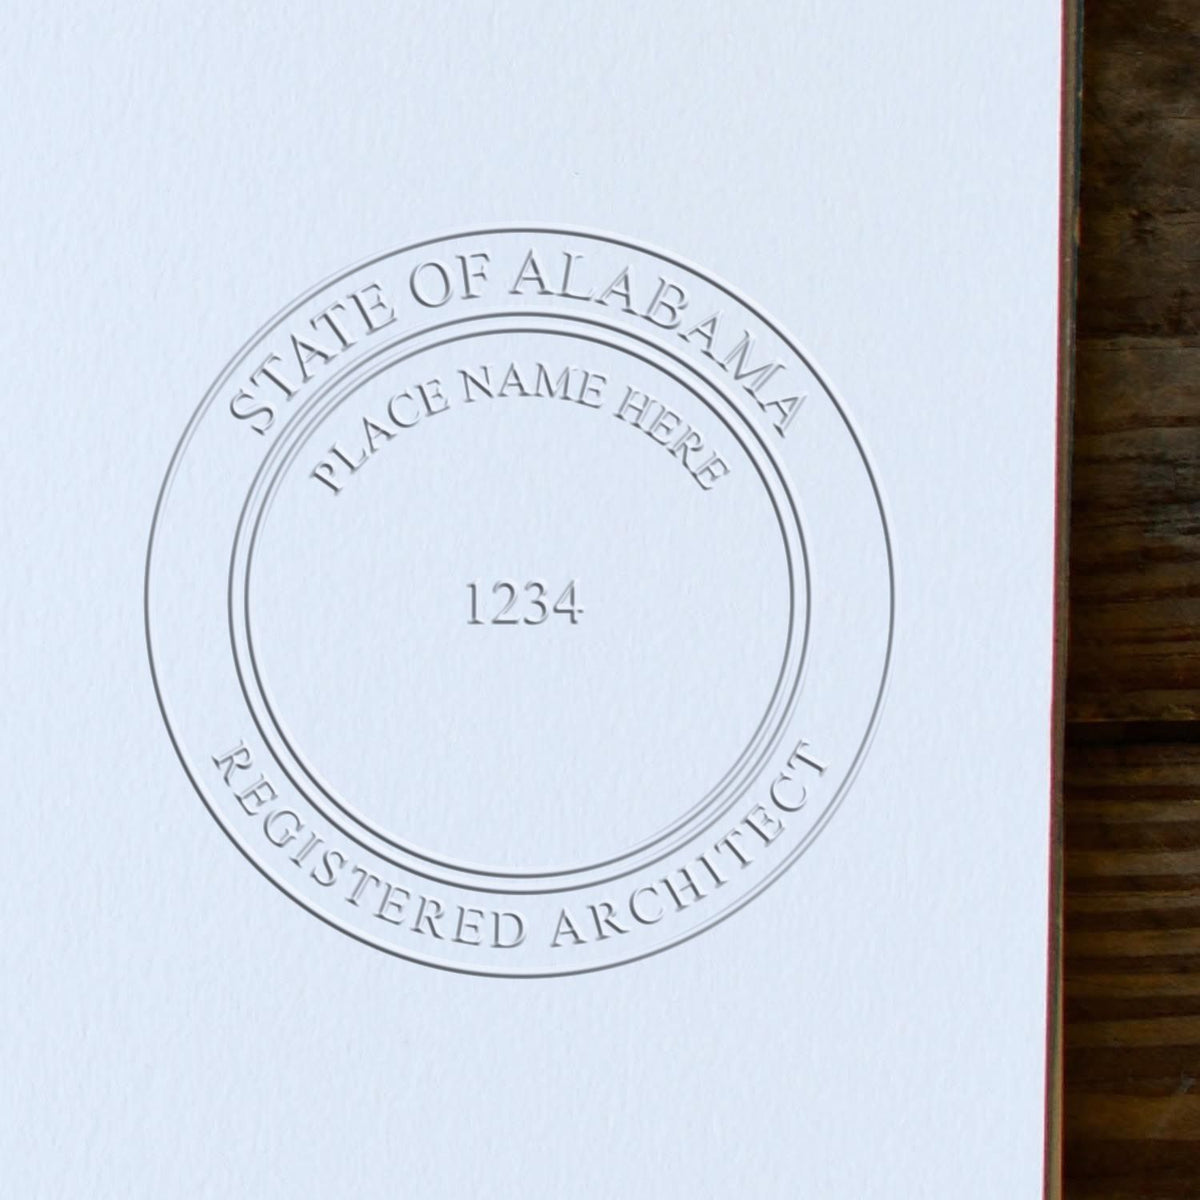 A lifestyle photo showing a stamped image of the Alabama Desk Architect Embossing Seal on a piece of paper